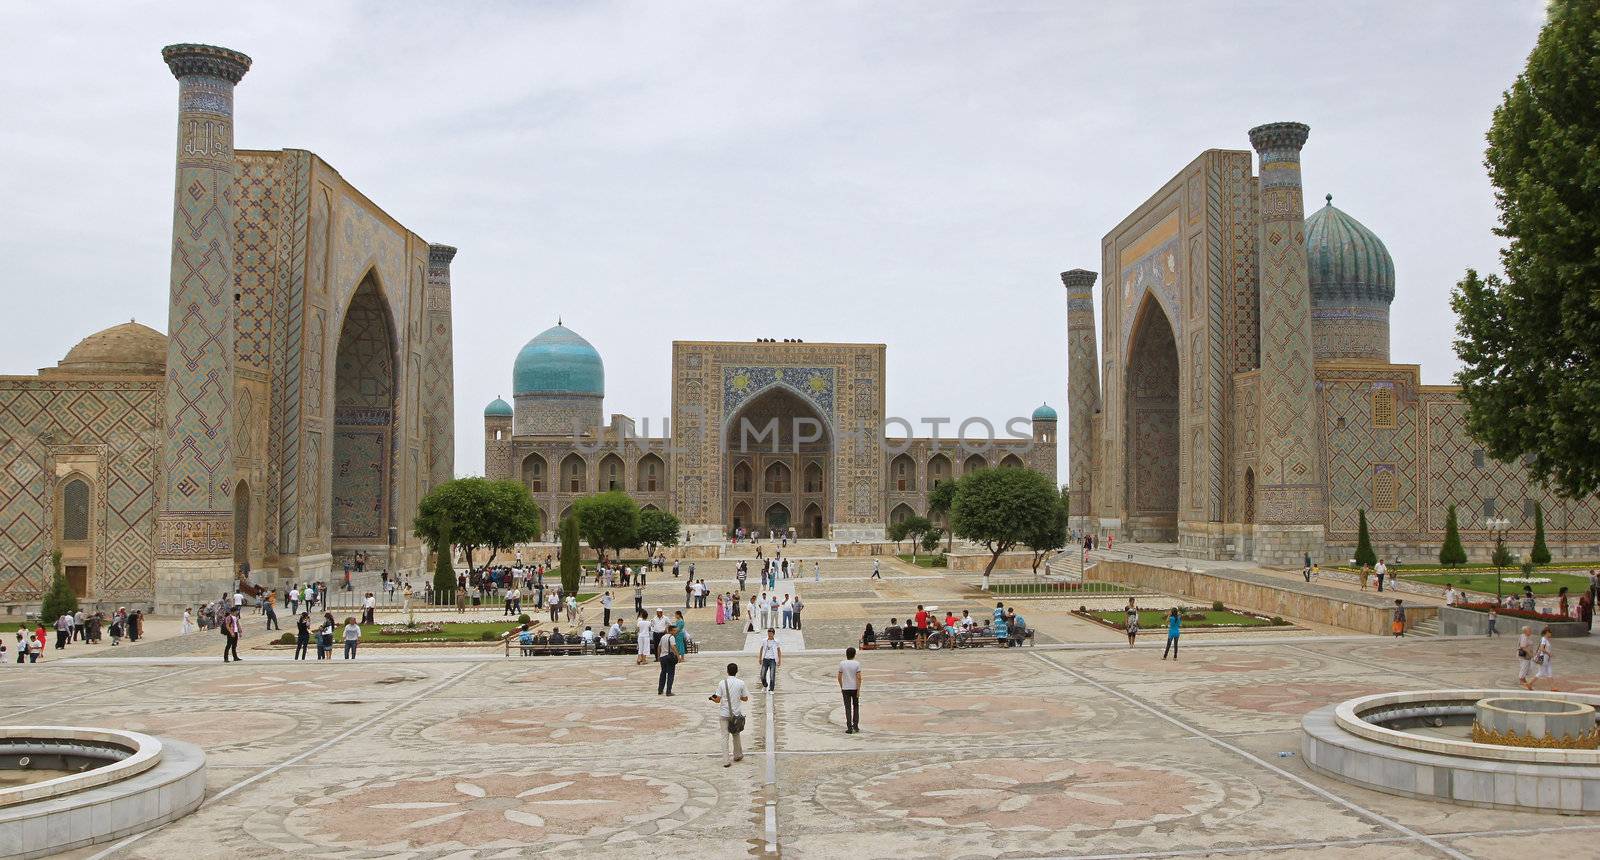 Registon Place, the most famous attraction of Samarkand and one of the world-known places along the silk road. Uzbekistan, Central Asia